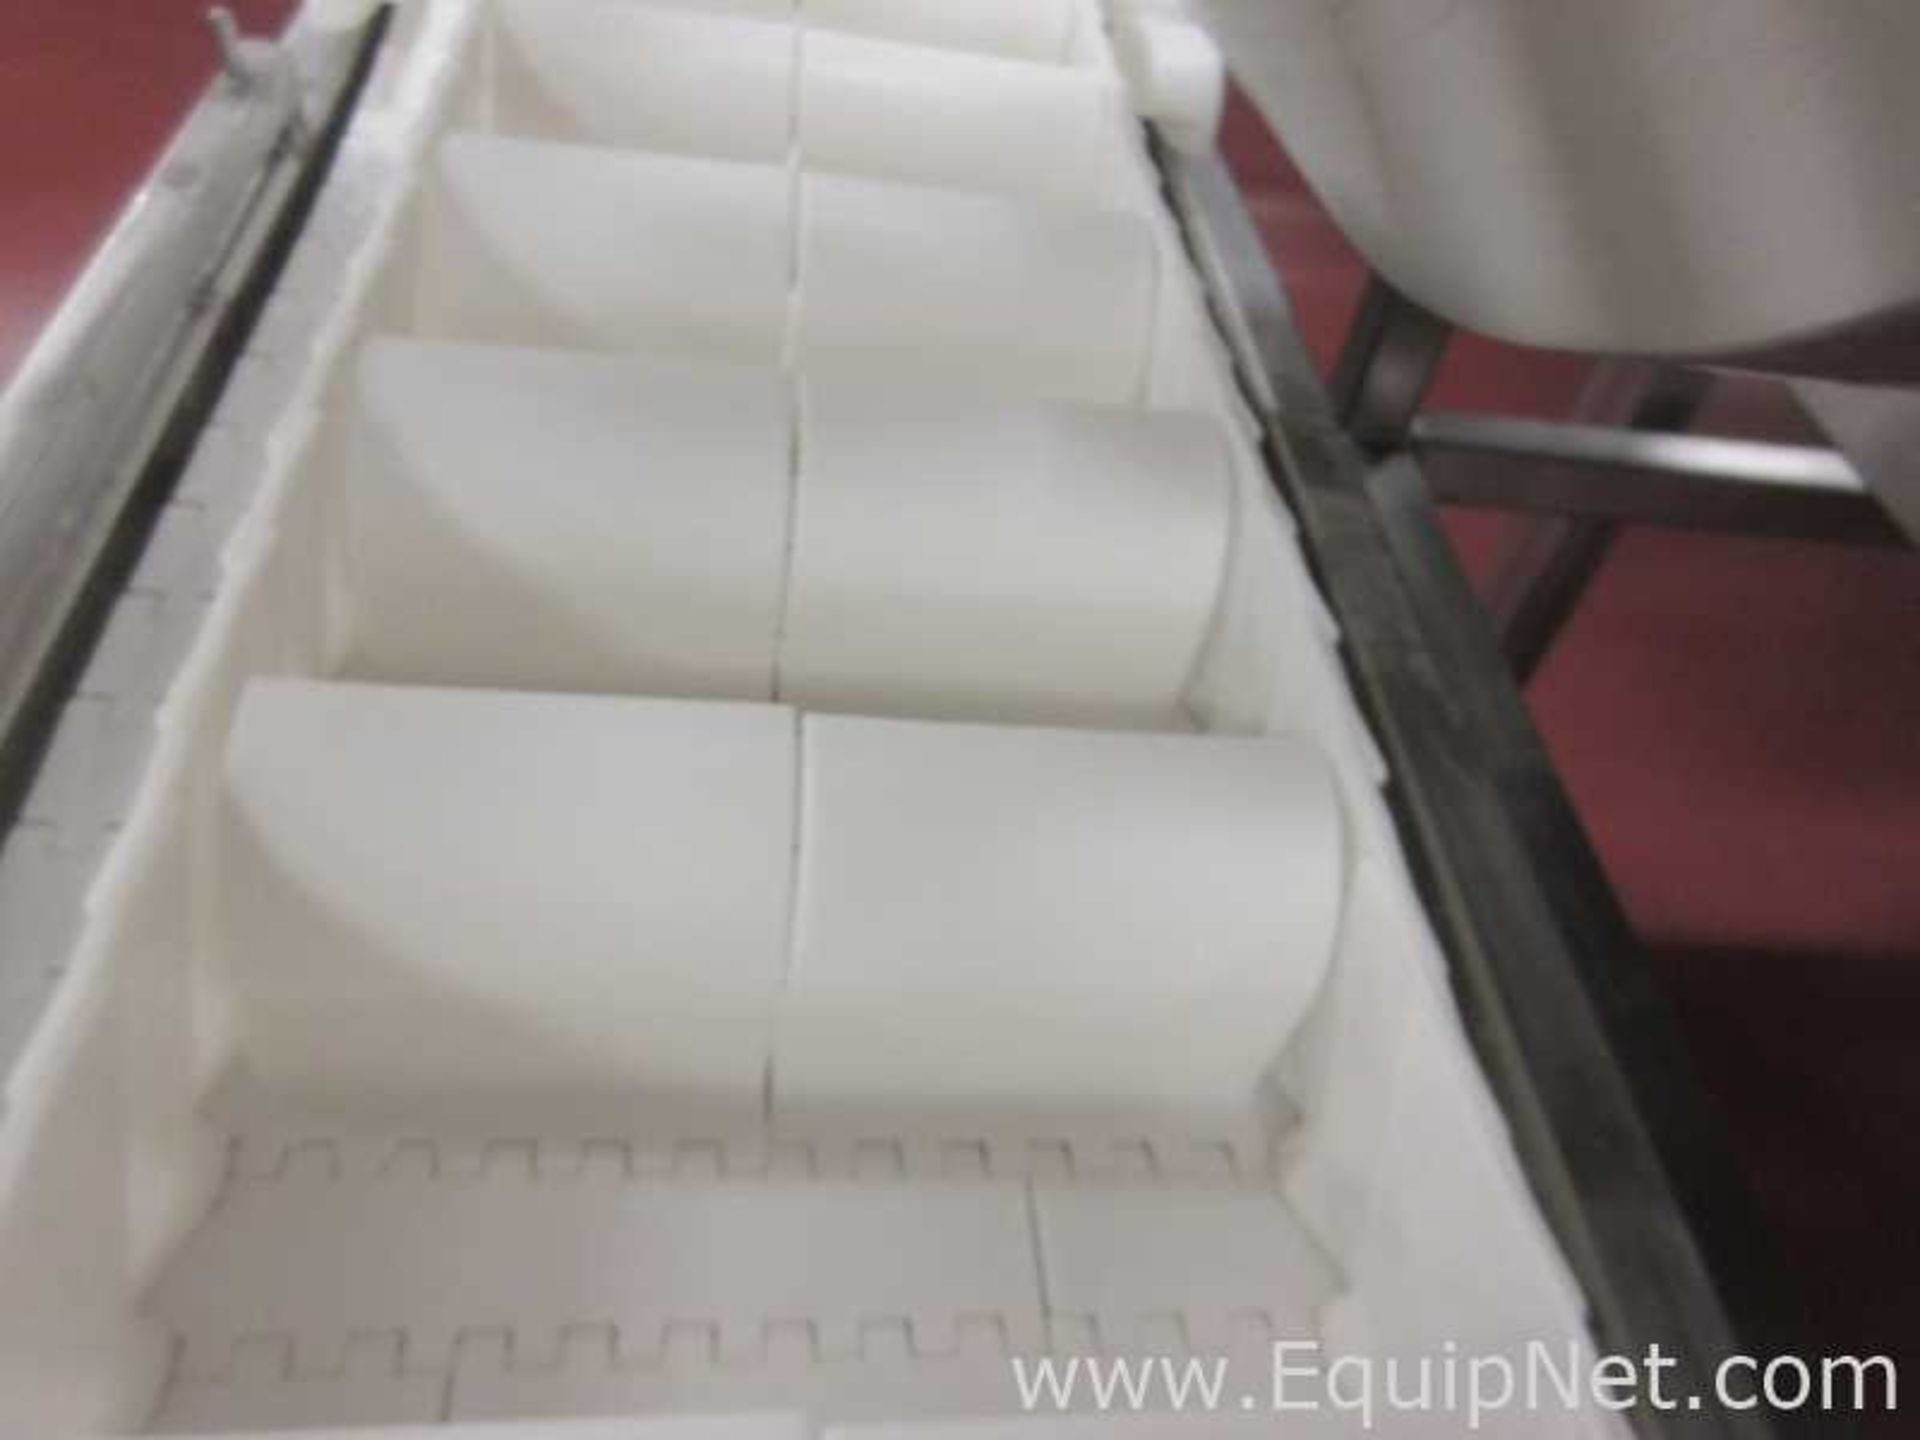 Incline Z Style Food Grade Conveyor Approx. 20 Foot High - Image 3 of 9